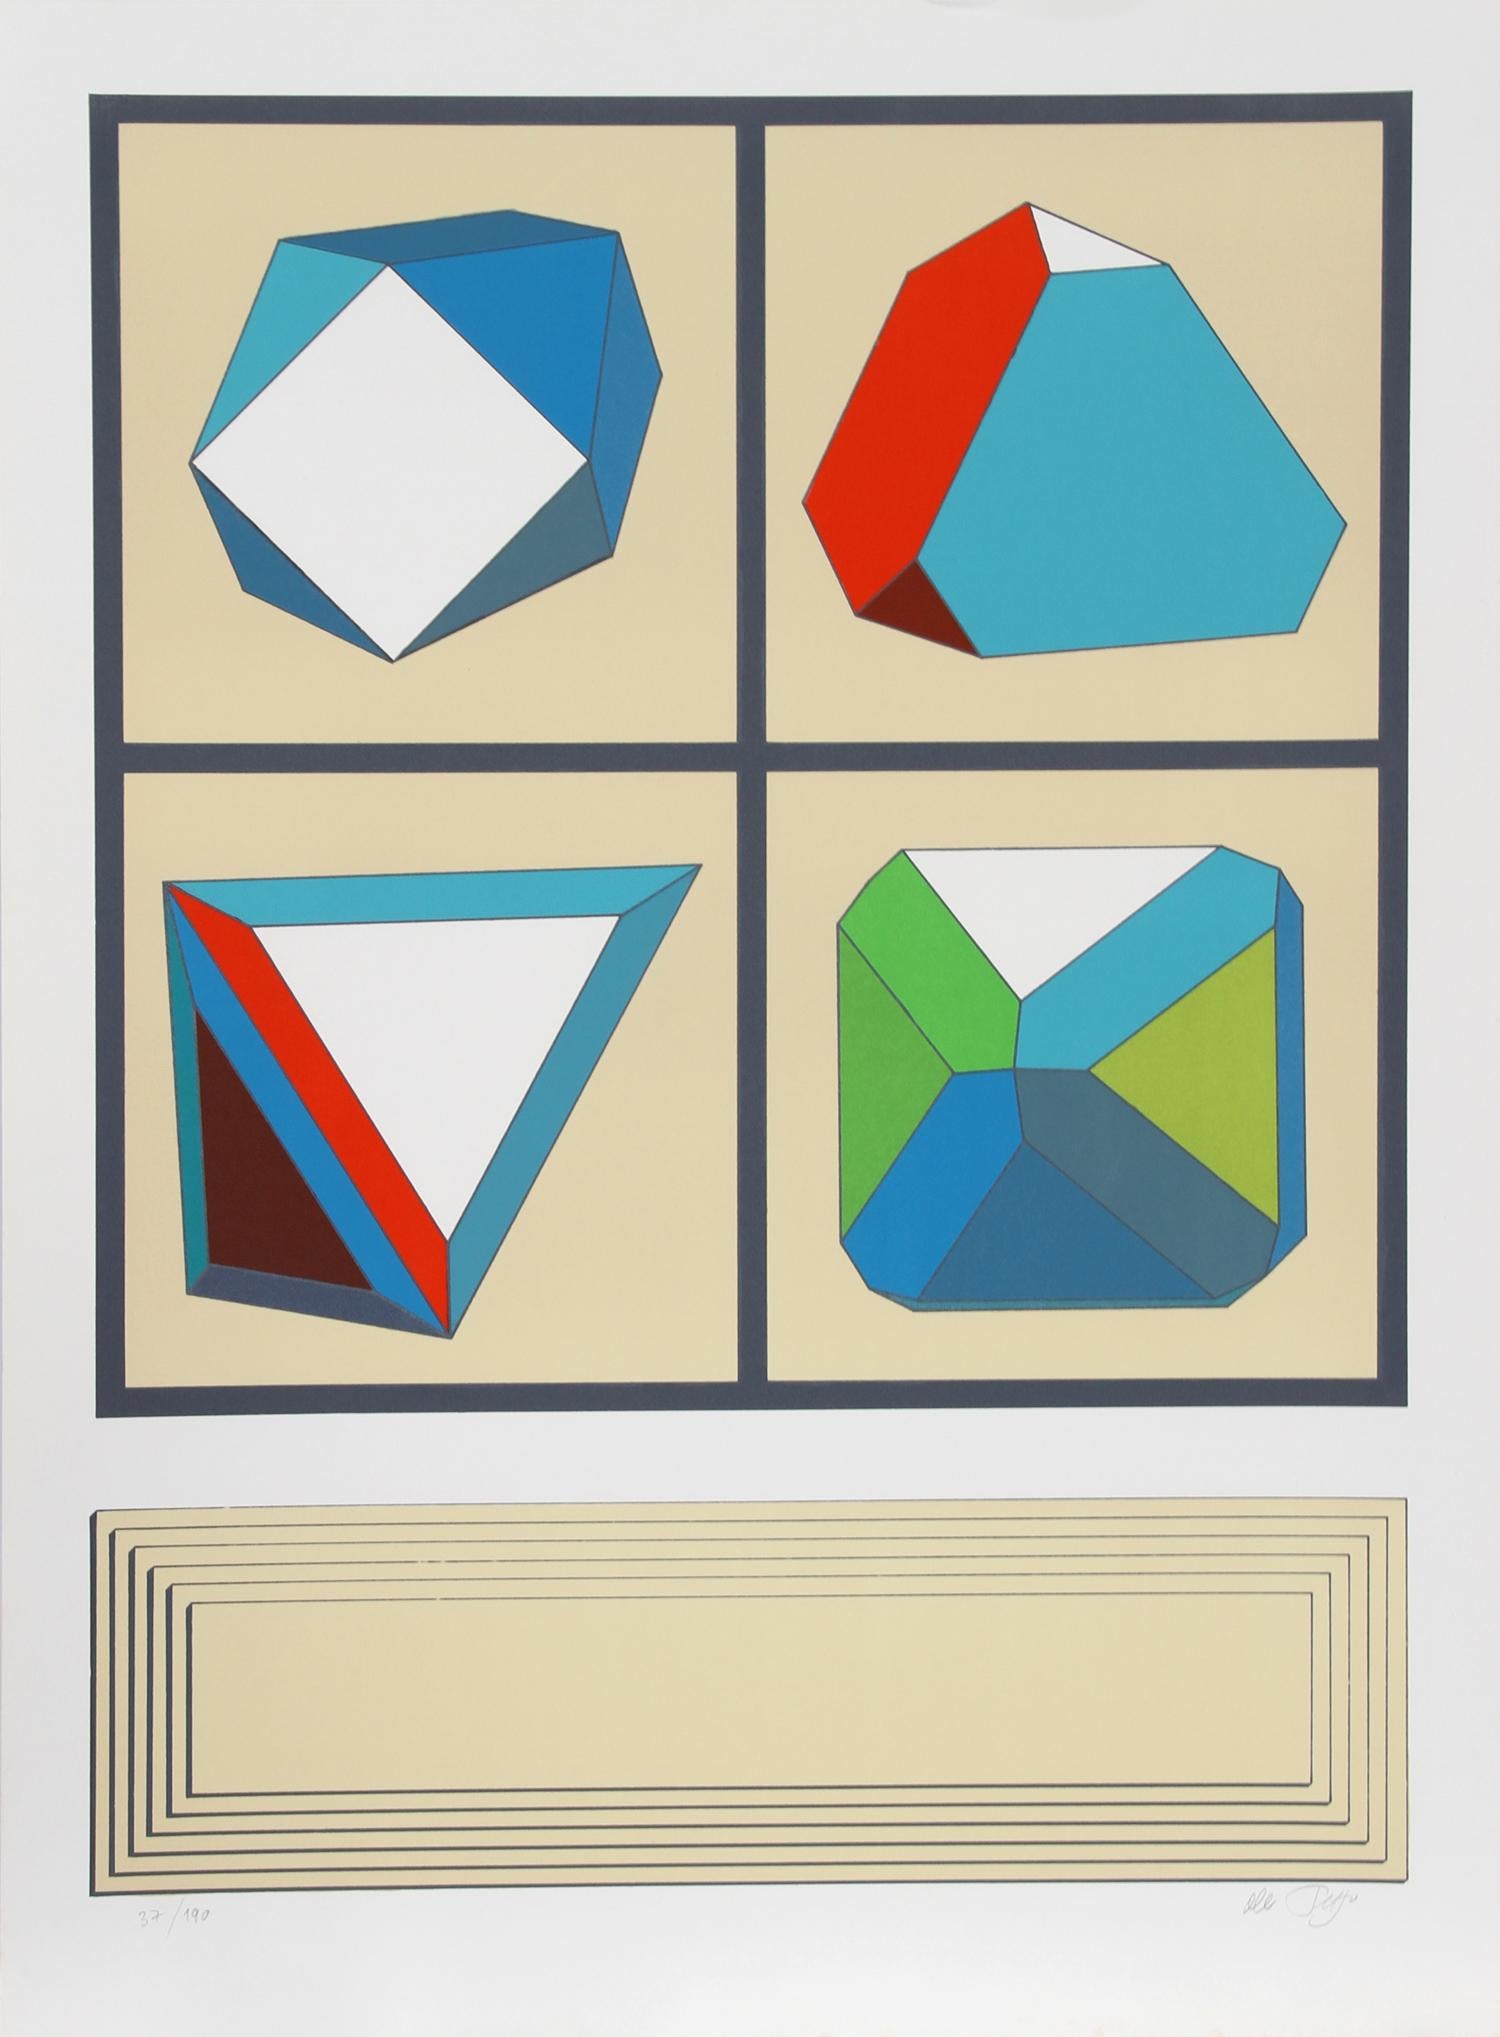 Untitled (Polygons), Geometric Abstract Screenprint by Lucio Del Pezzo